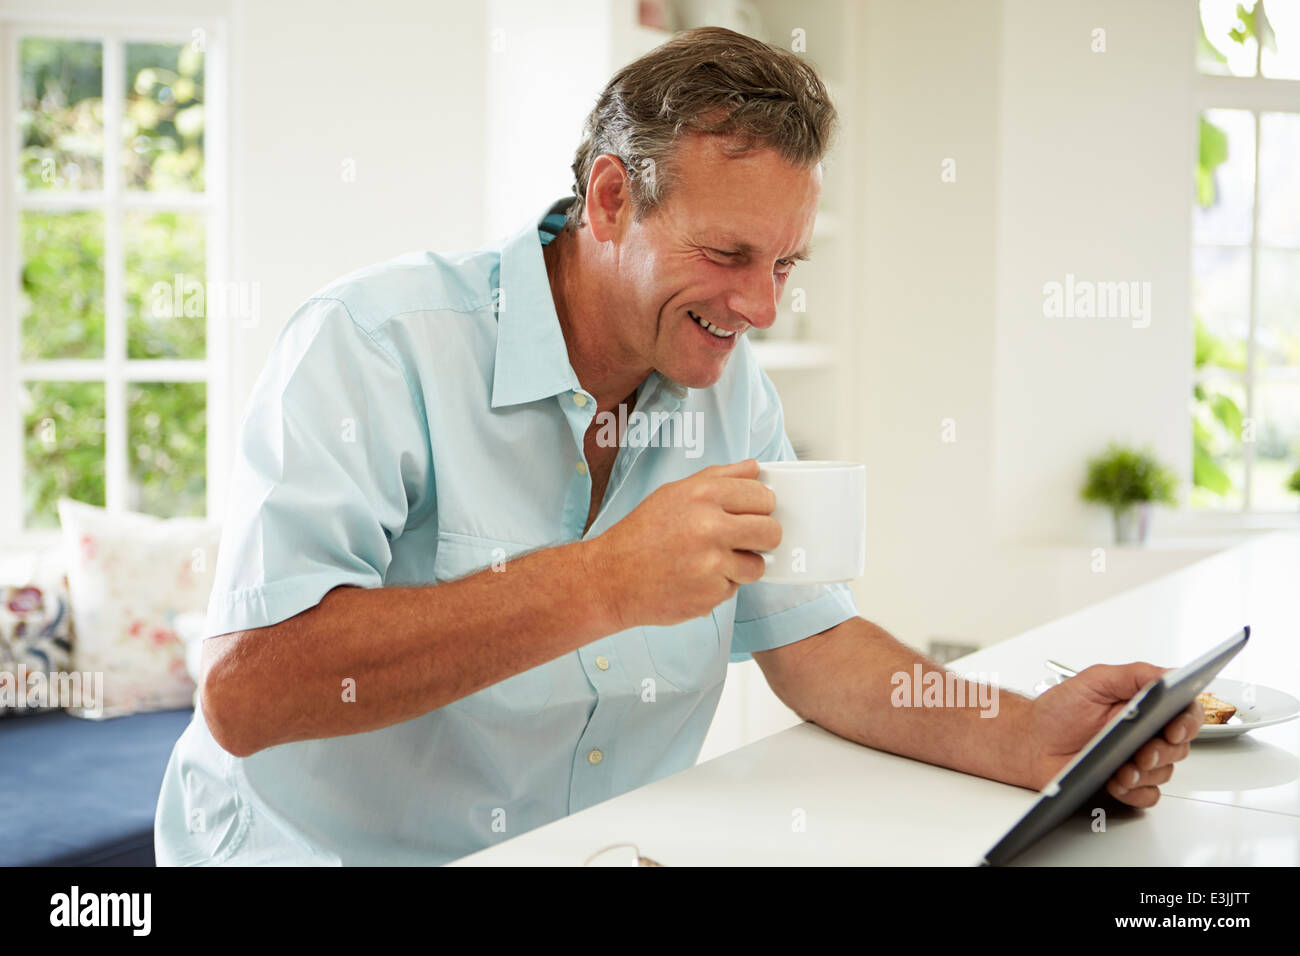 Middle Aged Man Using Digital Tablet Over Breakfast Stock Photo